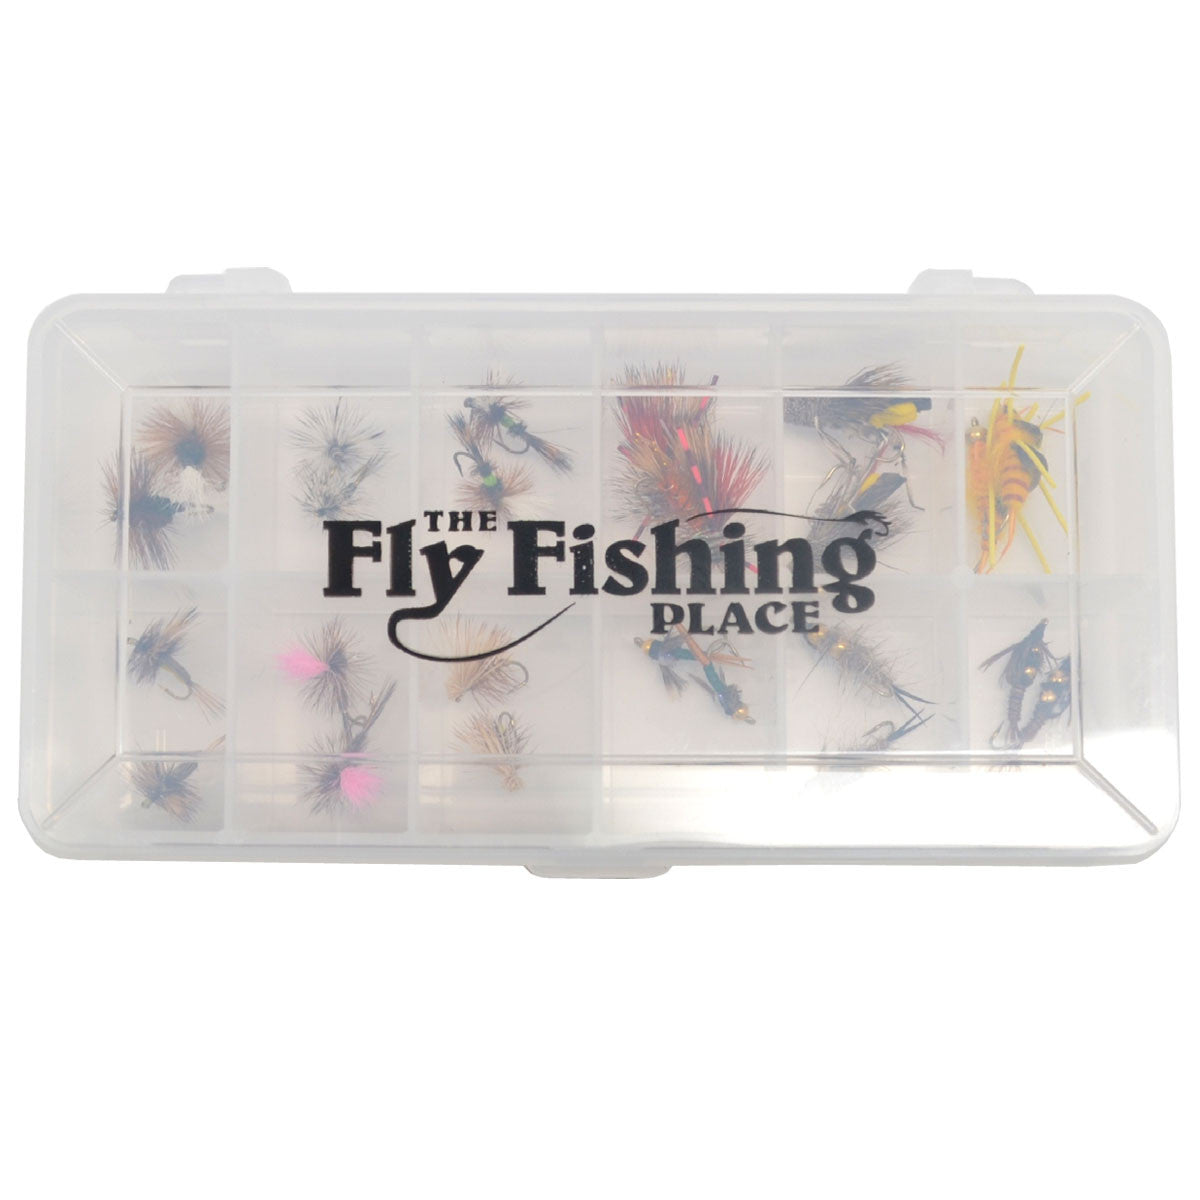 Trout Fly Assortment - Essential Western Dry and Nymph Fly Fishing Flies Collection - 2 Dozen Trout Flies with Fly Box